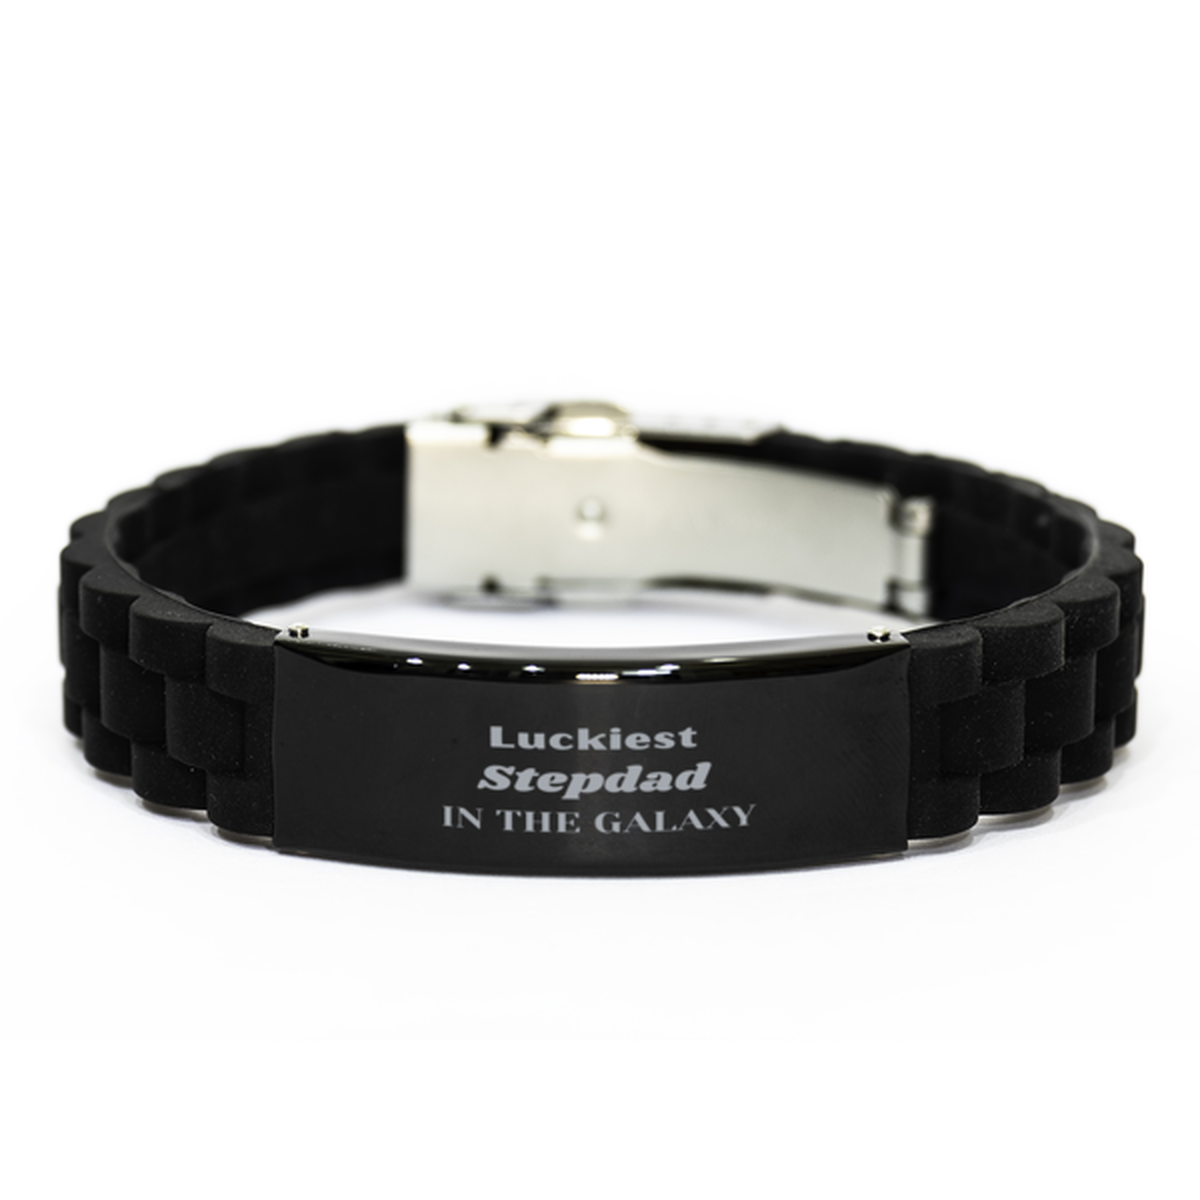 Luckiest Stepdad in the Galaxy, To My Stepdad Engraved Gifts, Christmas Stepdad Black Glidelock Clasp Bracelet Gifts, X-mas Birthday Unique Gifts For Stepdad Men Women